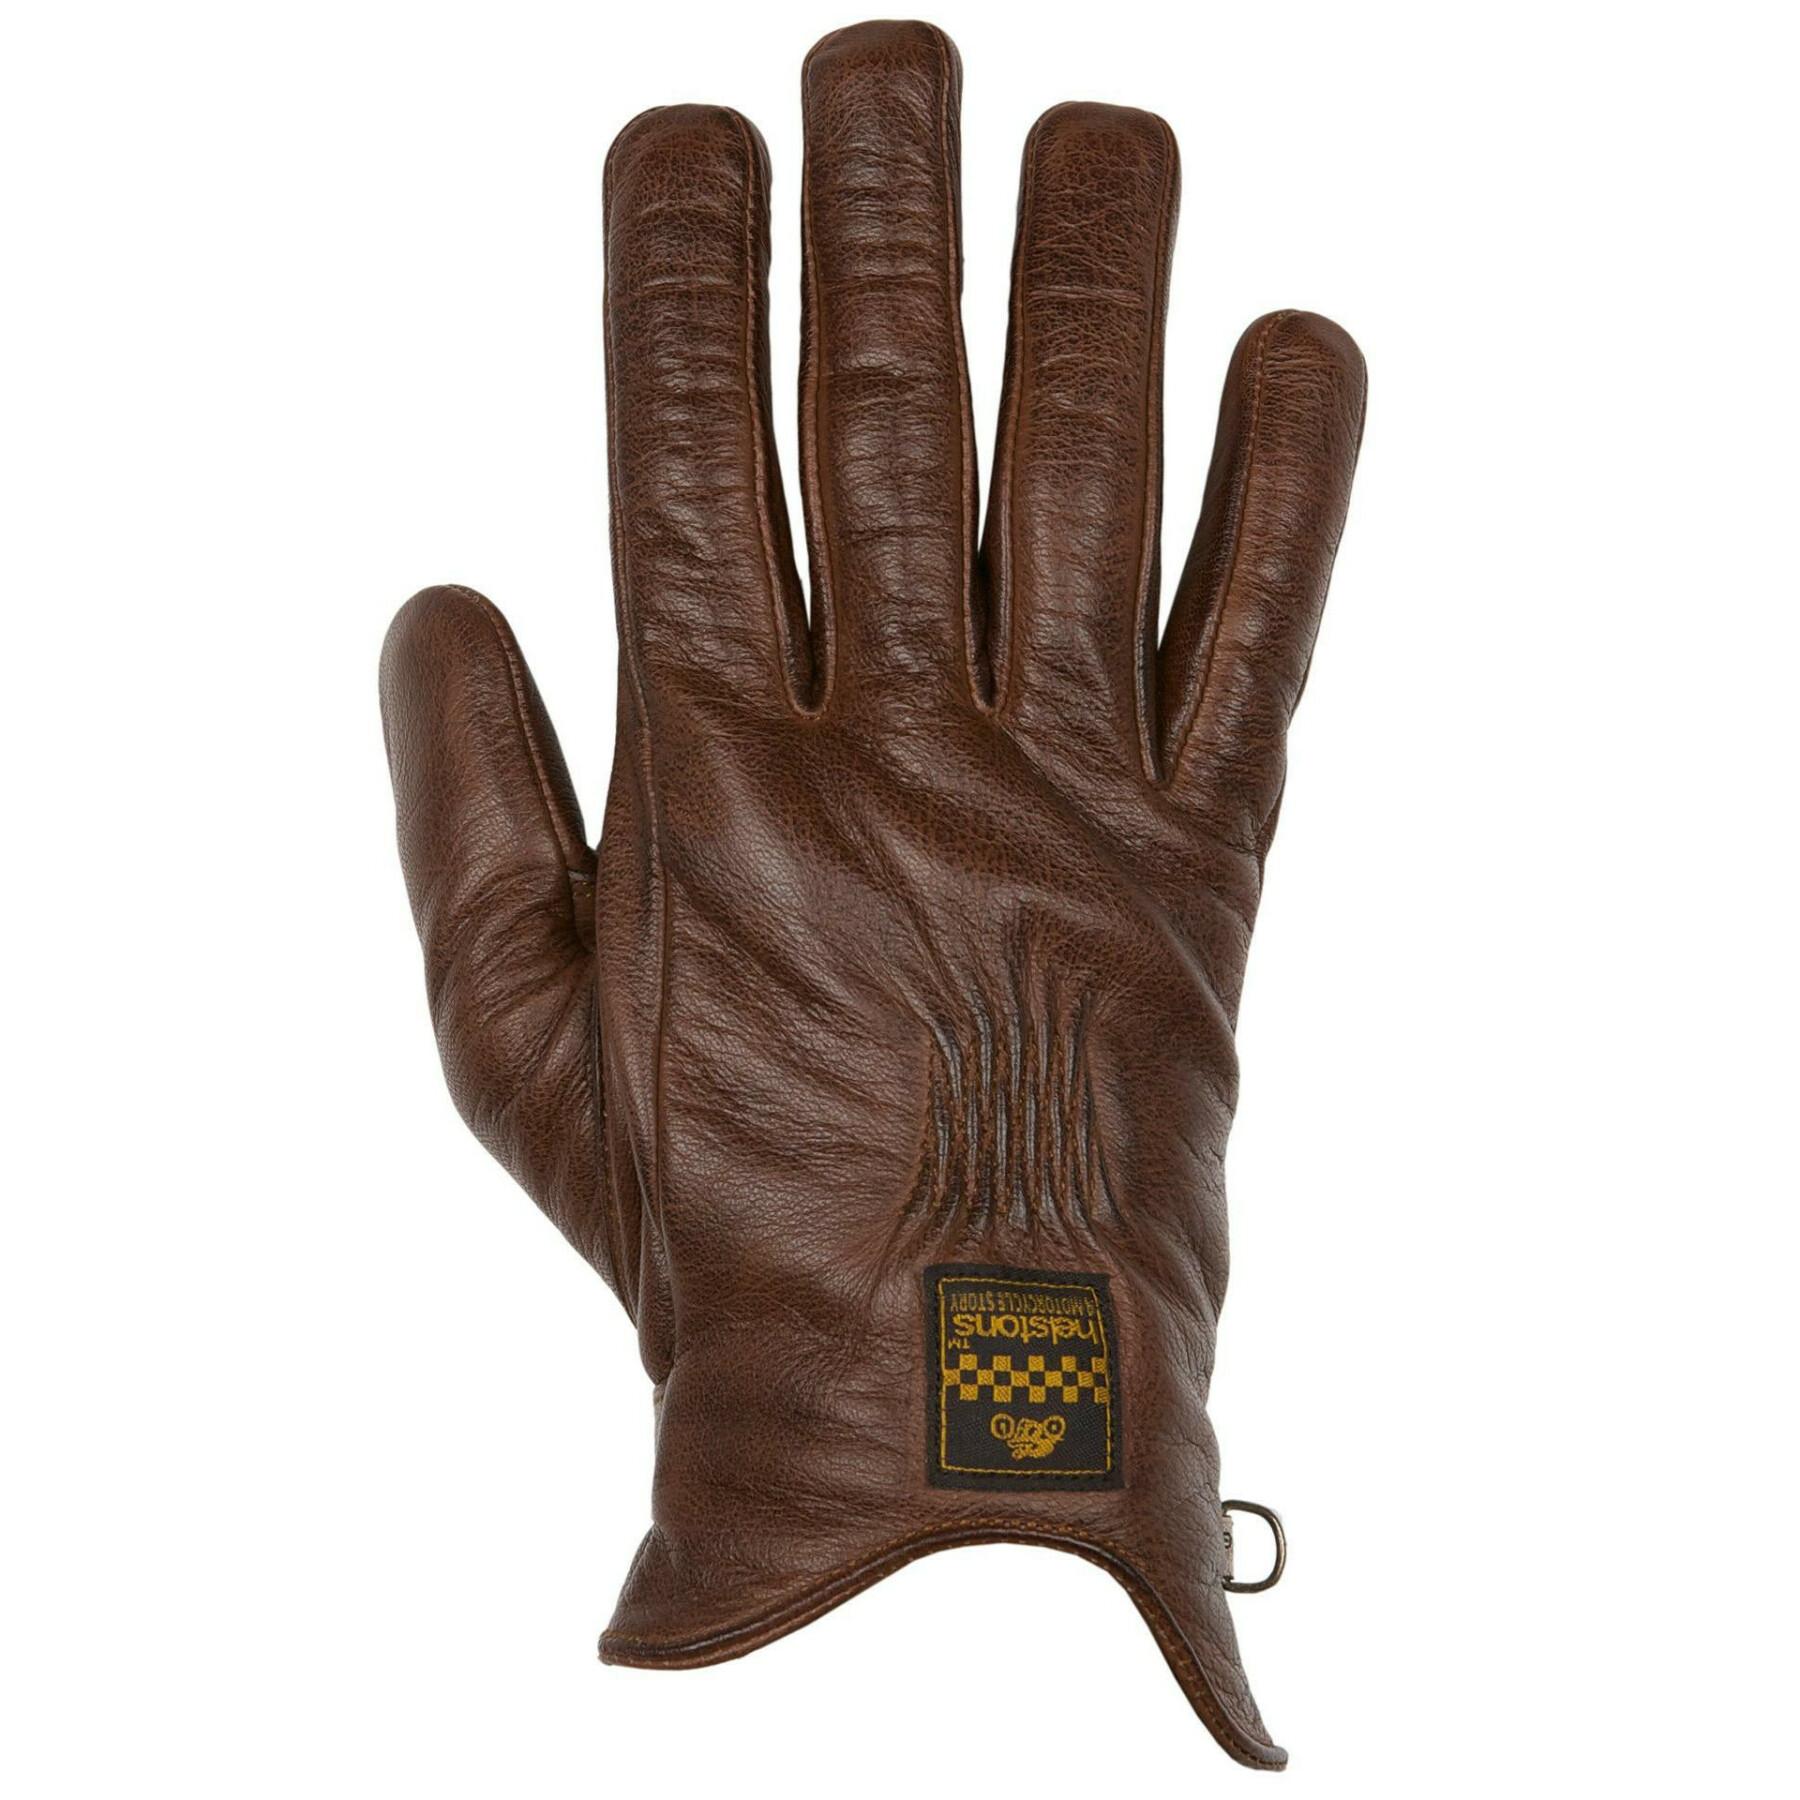 Summer leather motorcycle gloves Helstons condor